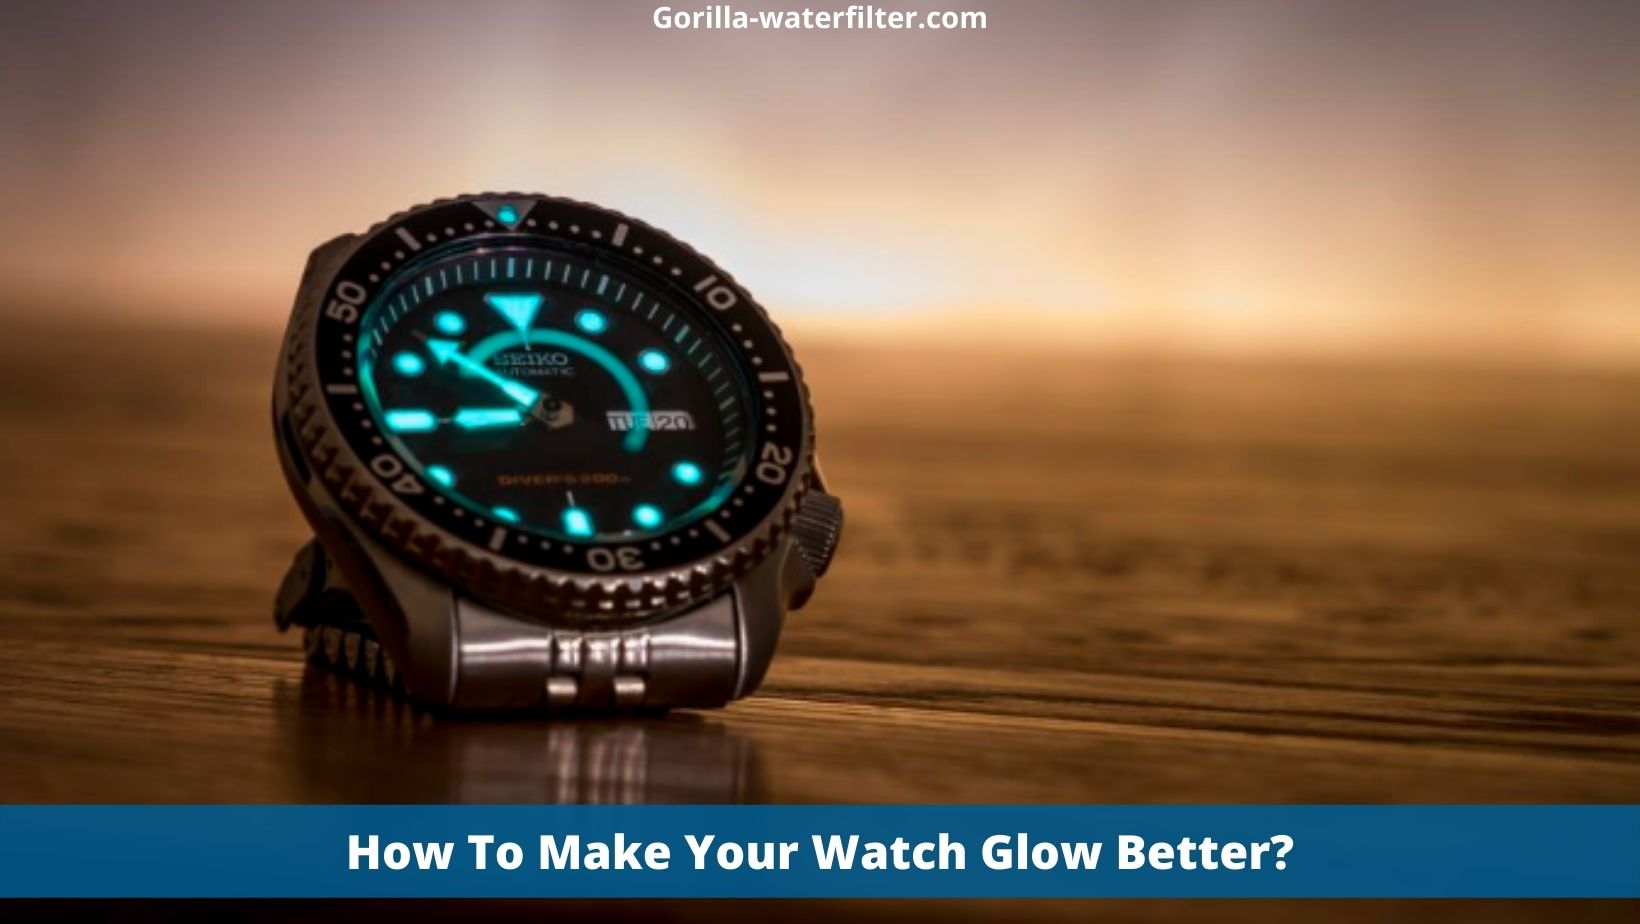 How To Make Your Watch Glow Better?